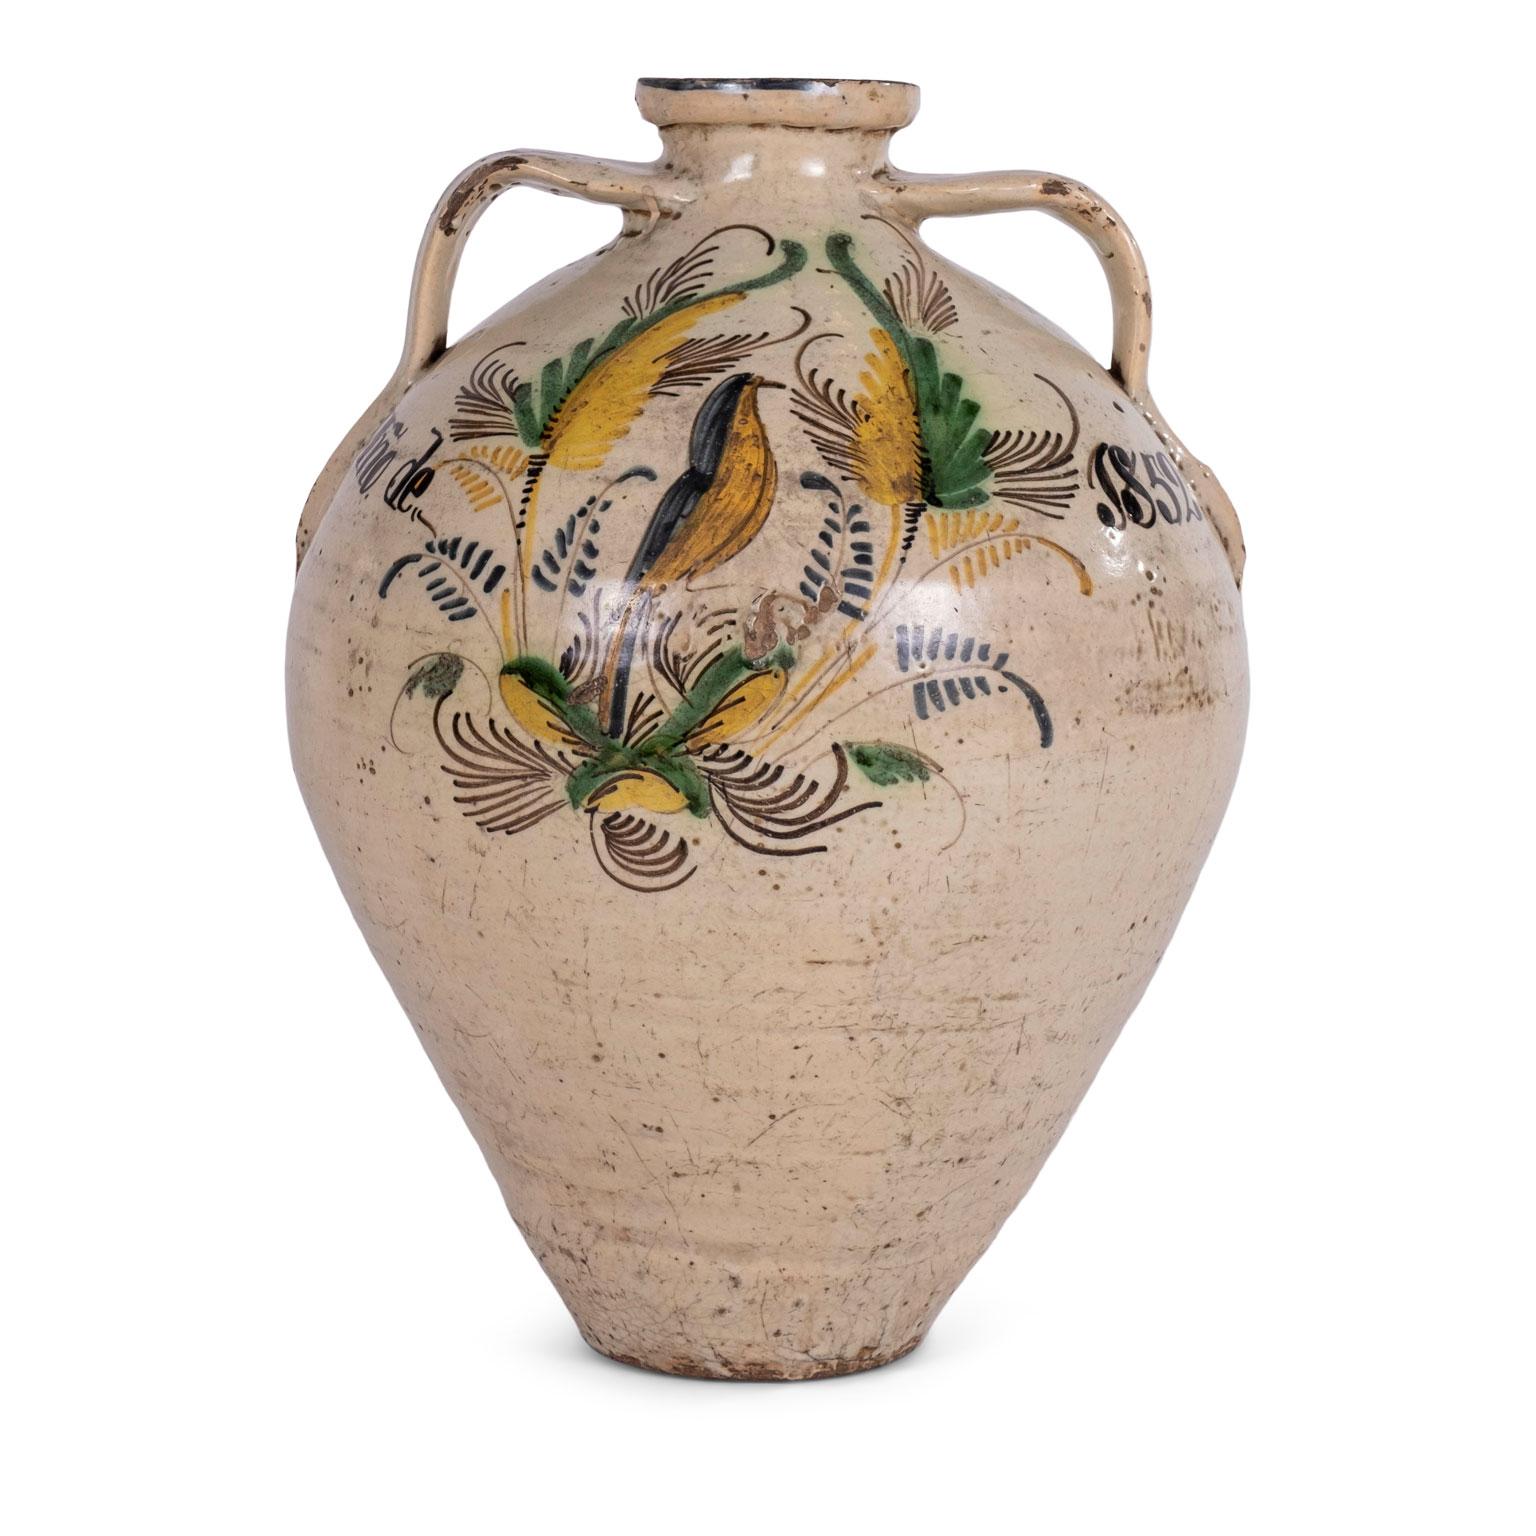 19th century Spanish Puente del Arzobispo glazed ceramic jar dated 1852 and marked for 